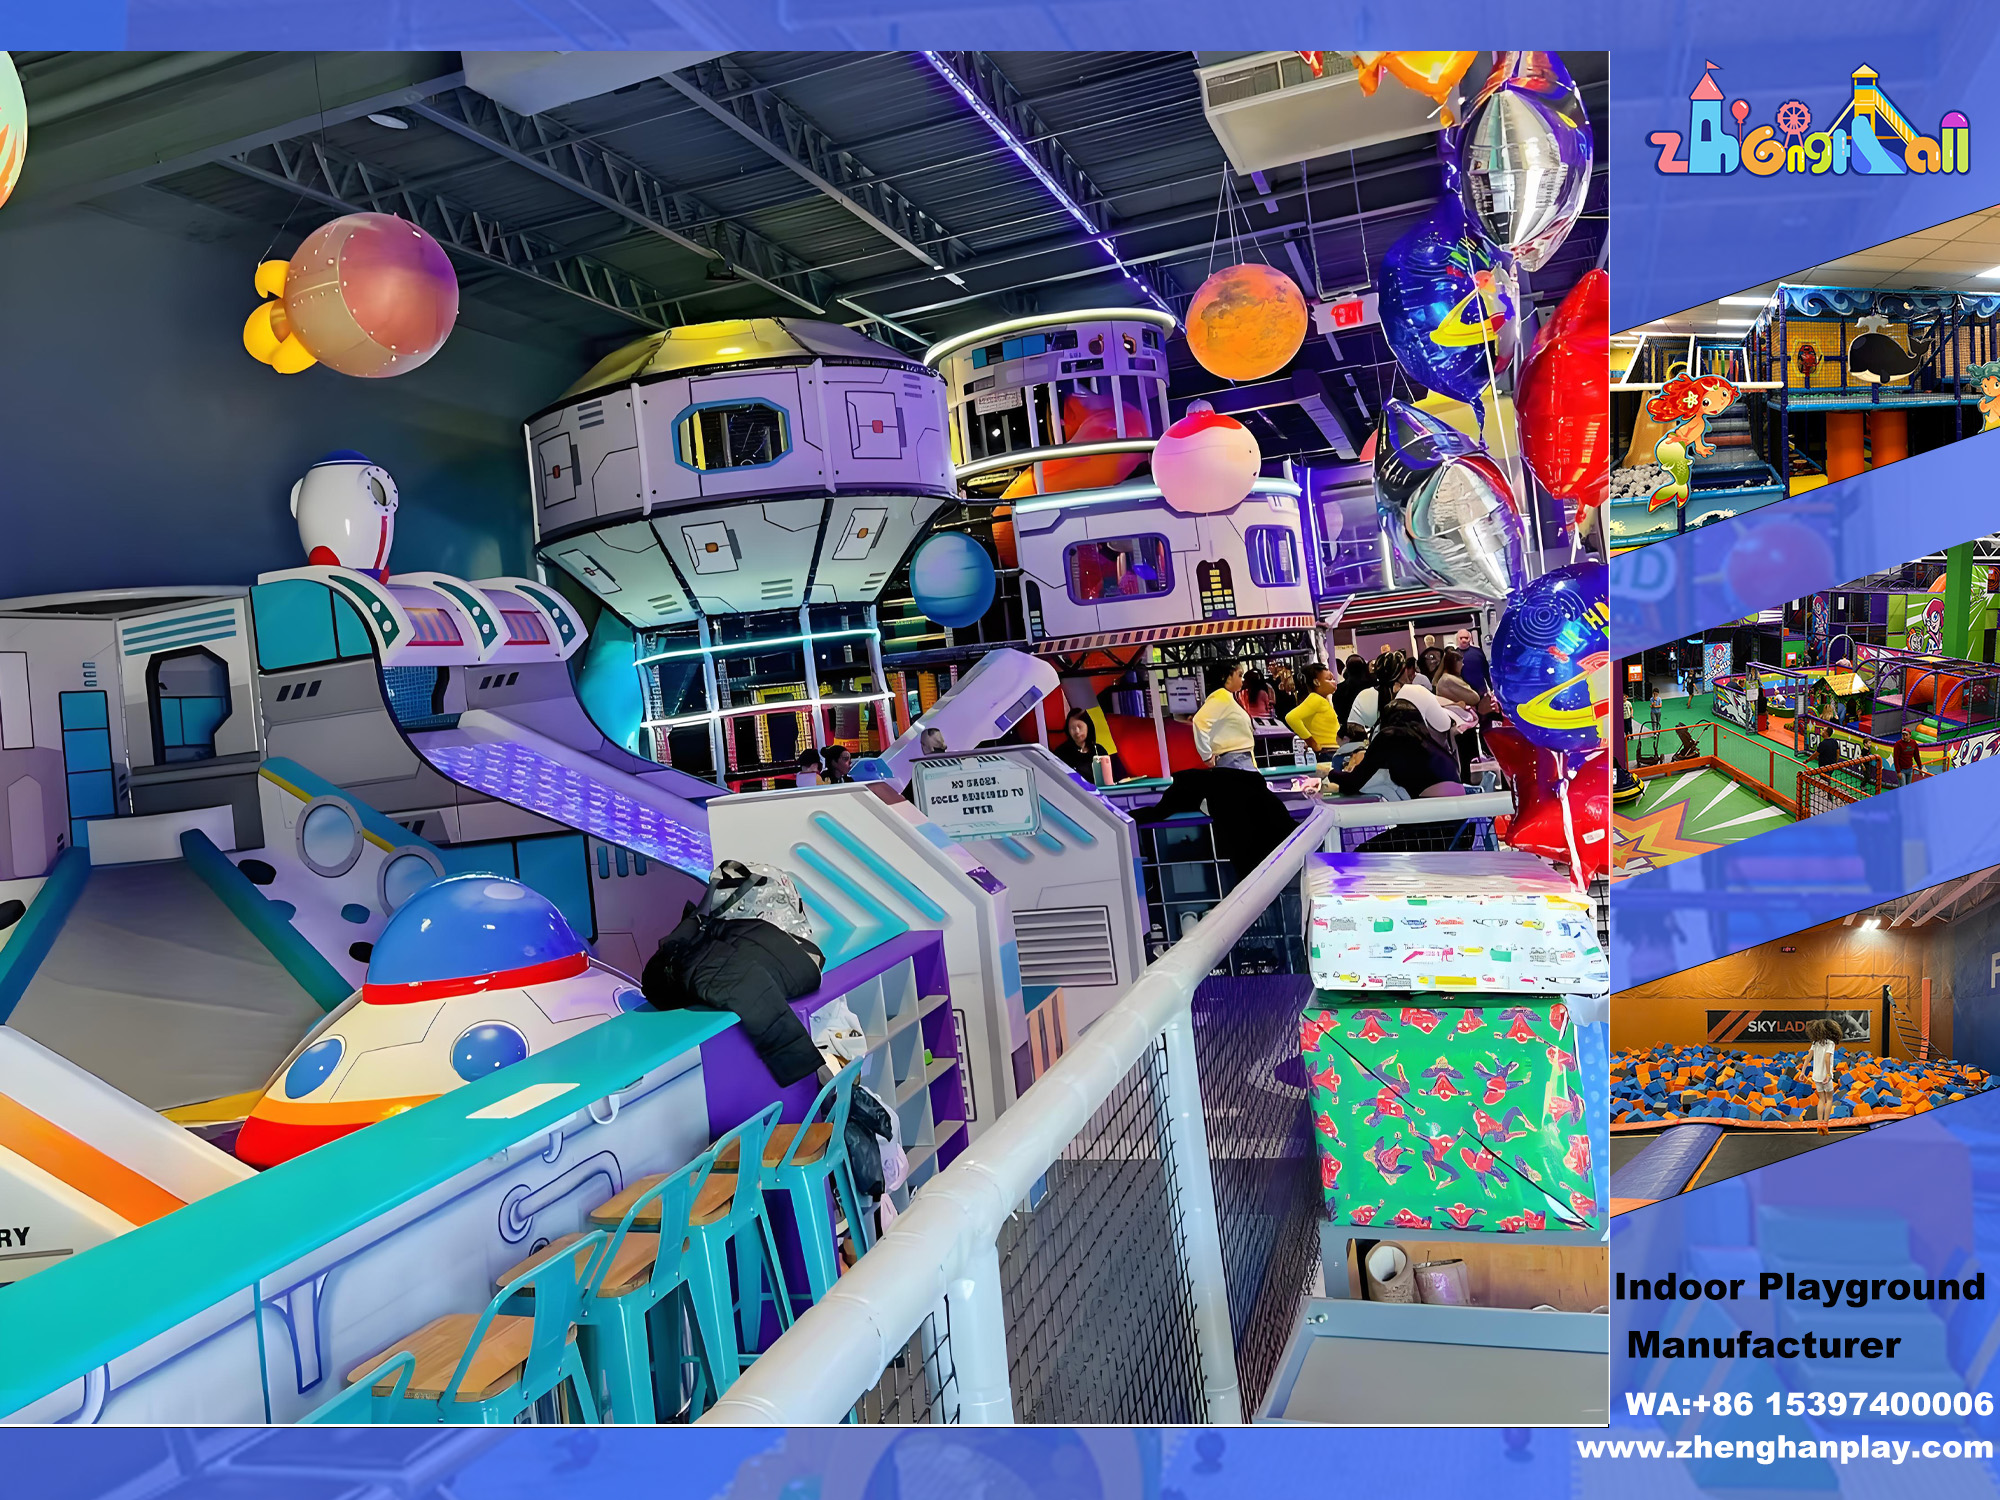 A case of a space-themed indoor playground in Canada